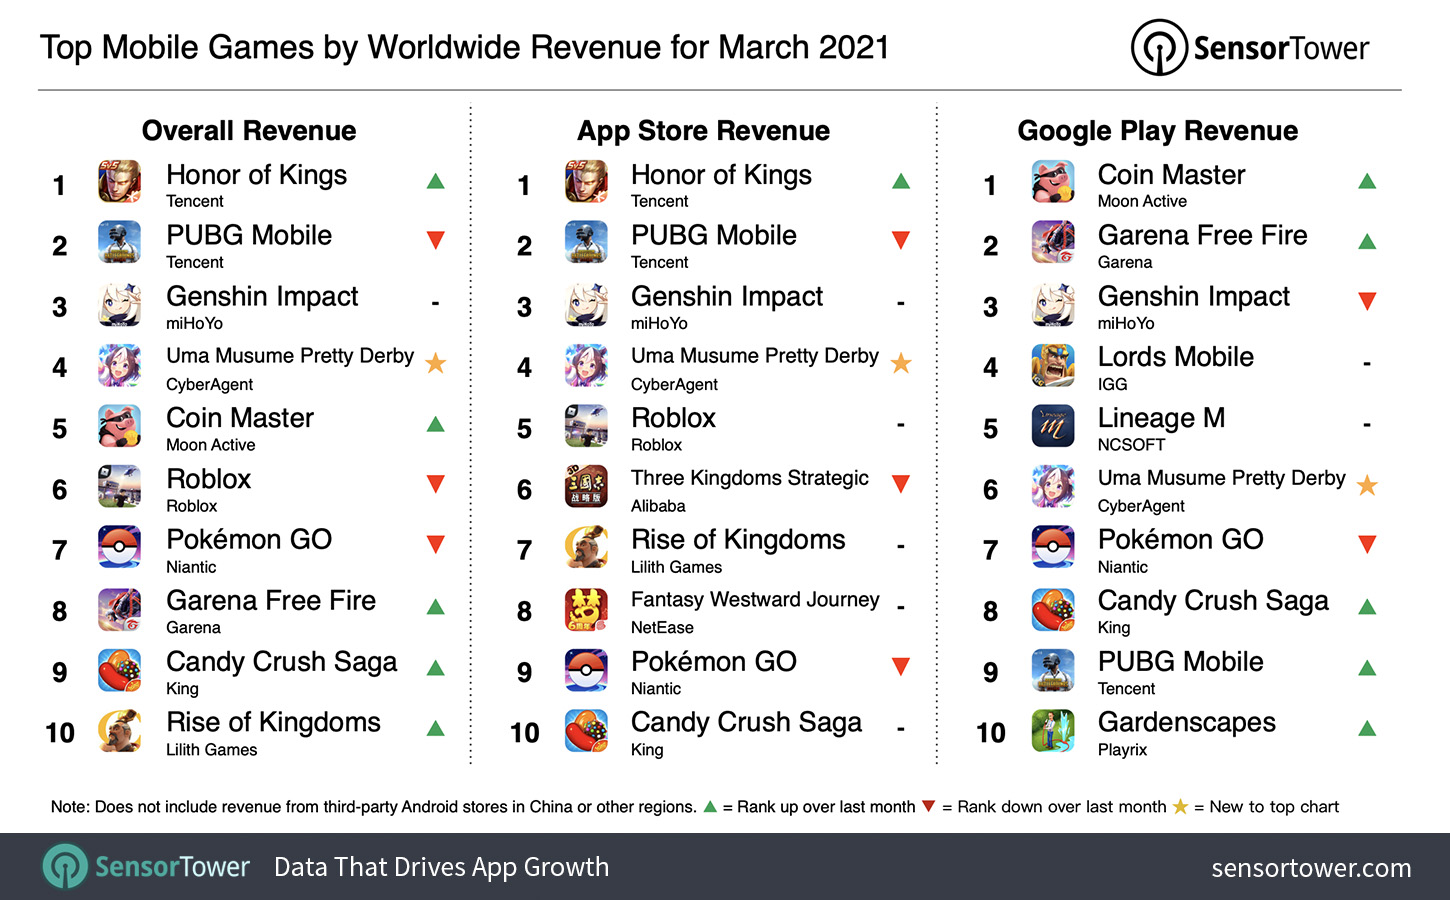 “Top Grossing Mobile Games Worldwide for March 2021